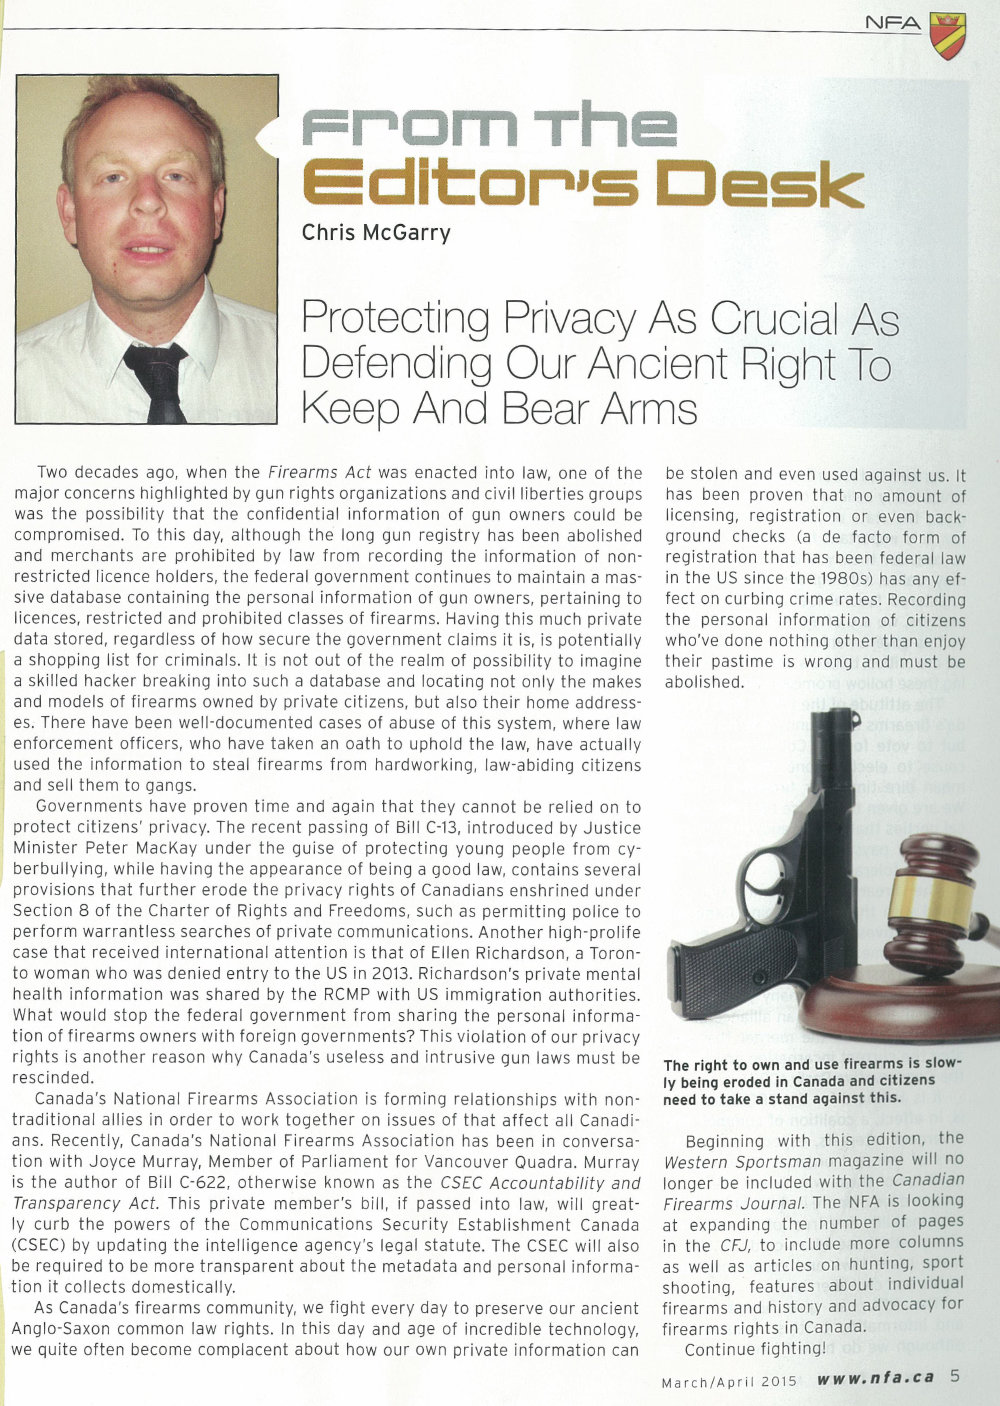 Protecting Privacy As Crucial As Defending Our Ancient Right To Keep And Bear Arms